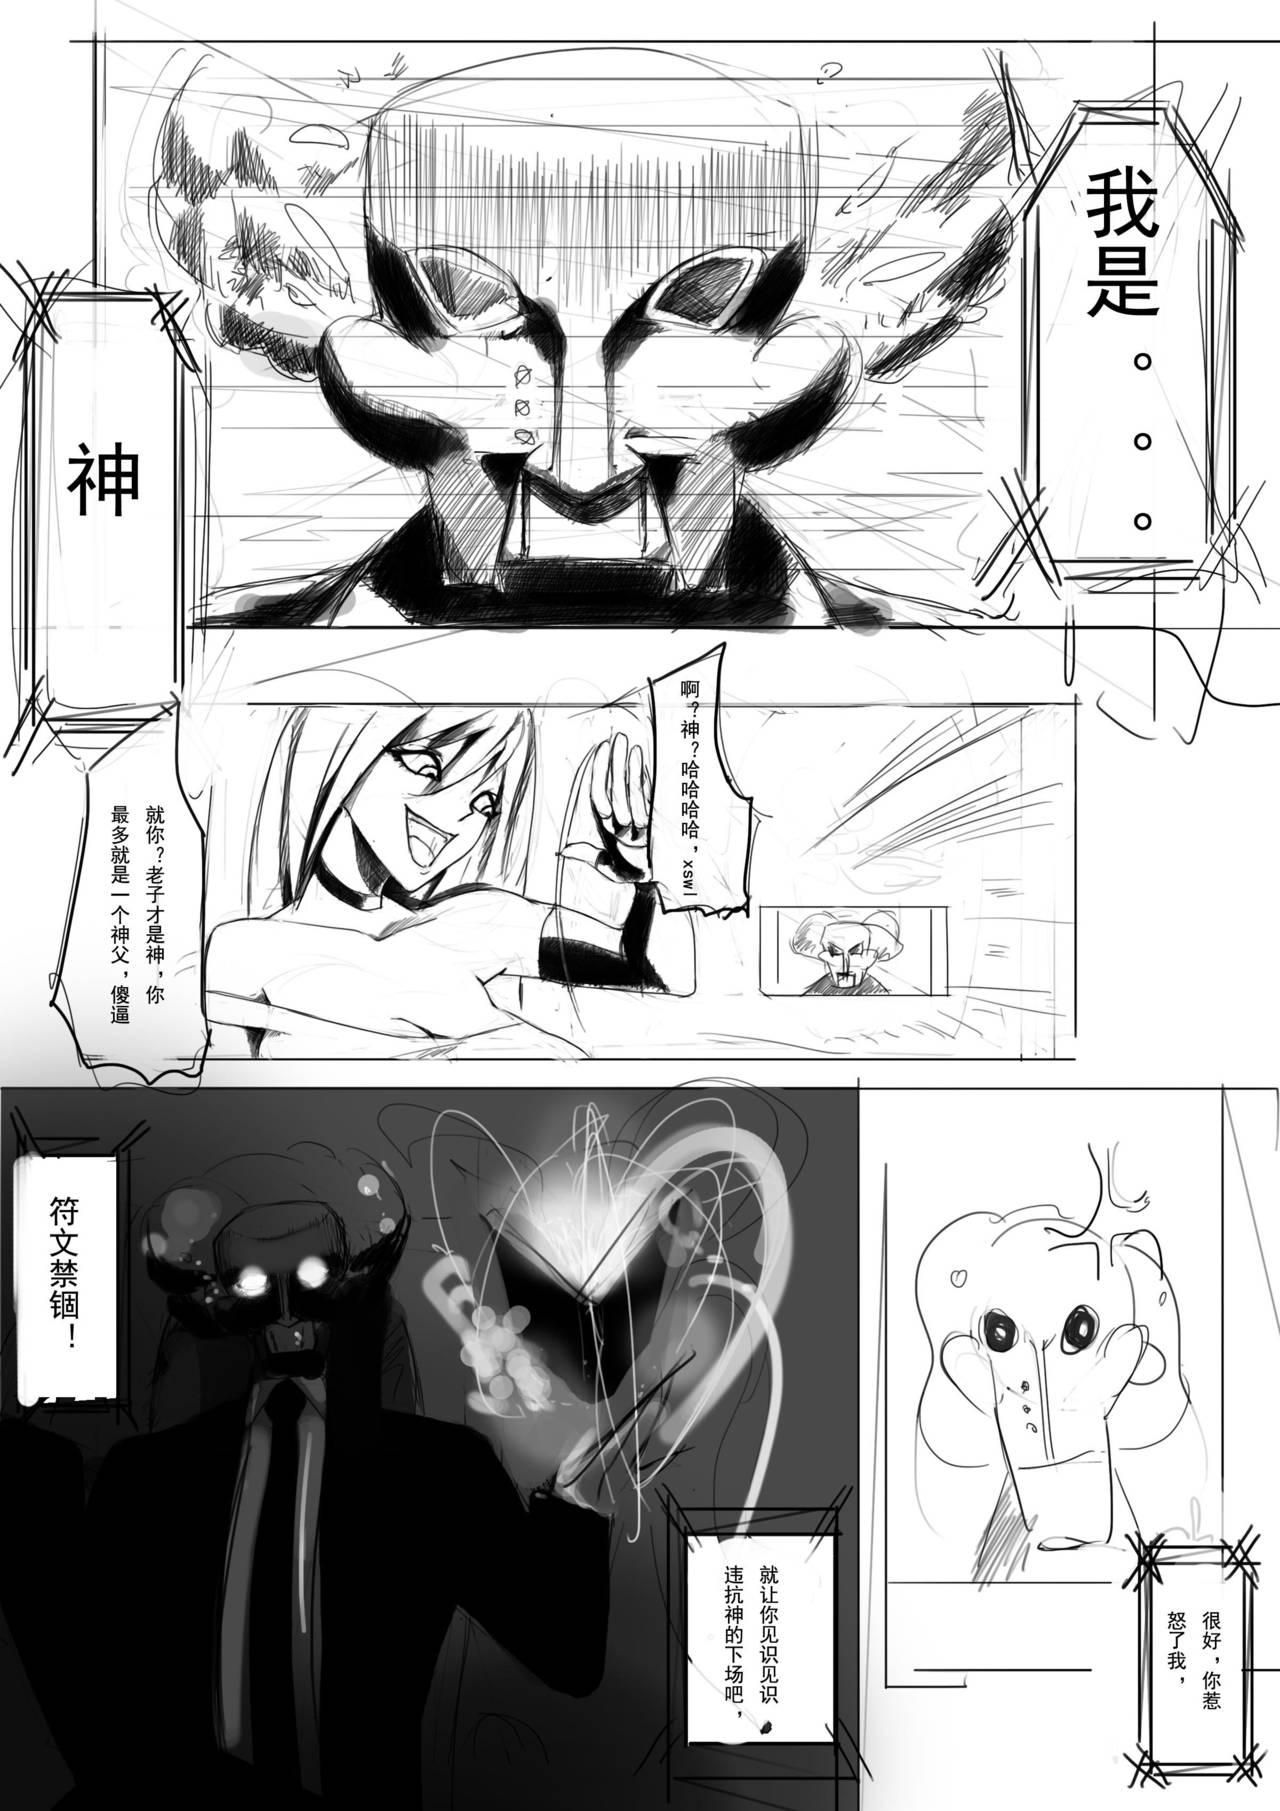 Kinky 洗澡道 堂堂连载！！！ - League of legends Tight Pussy - Page 9